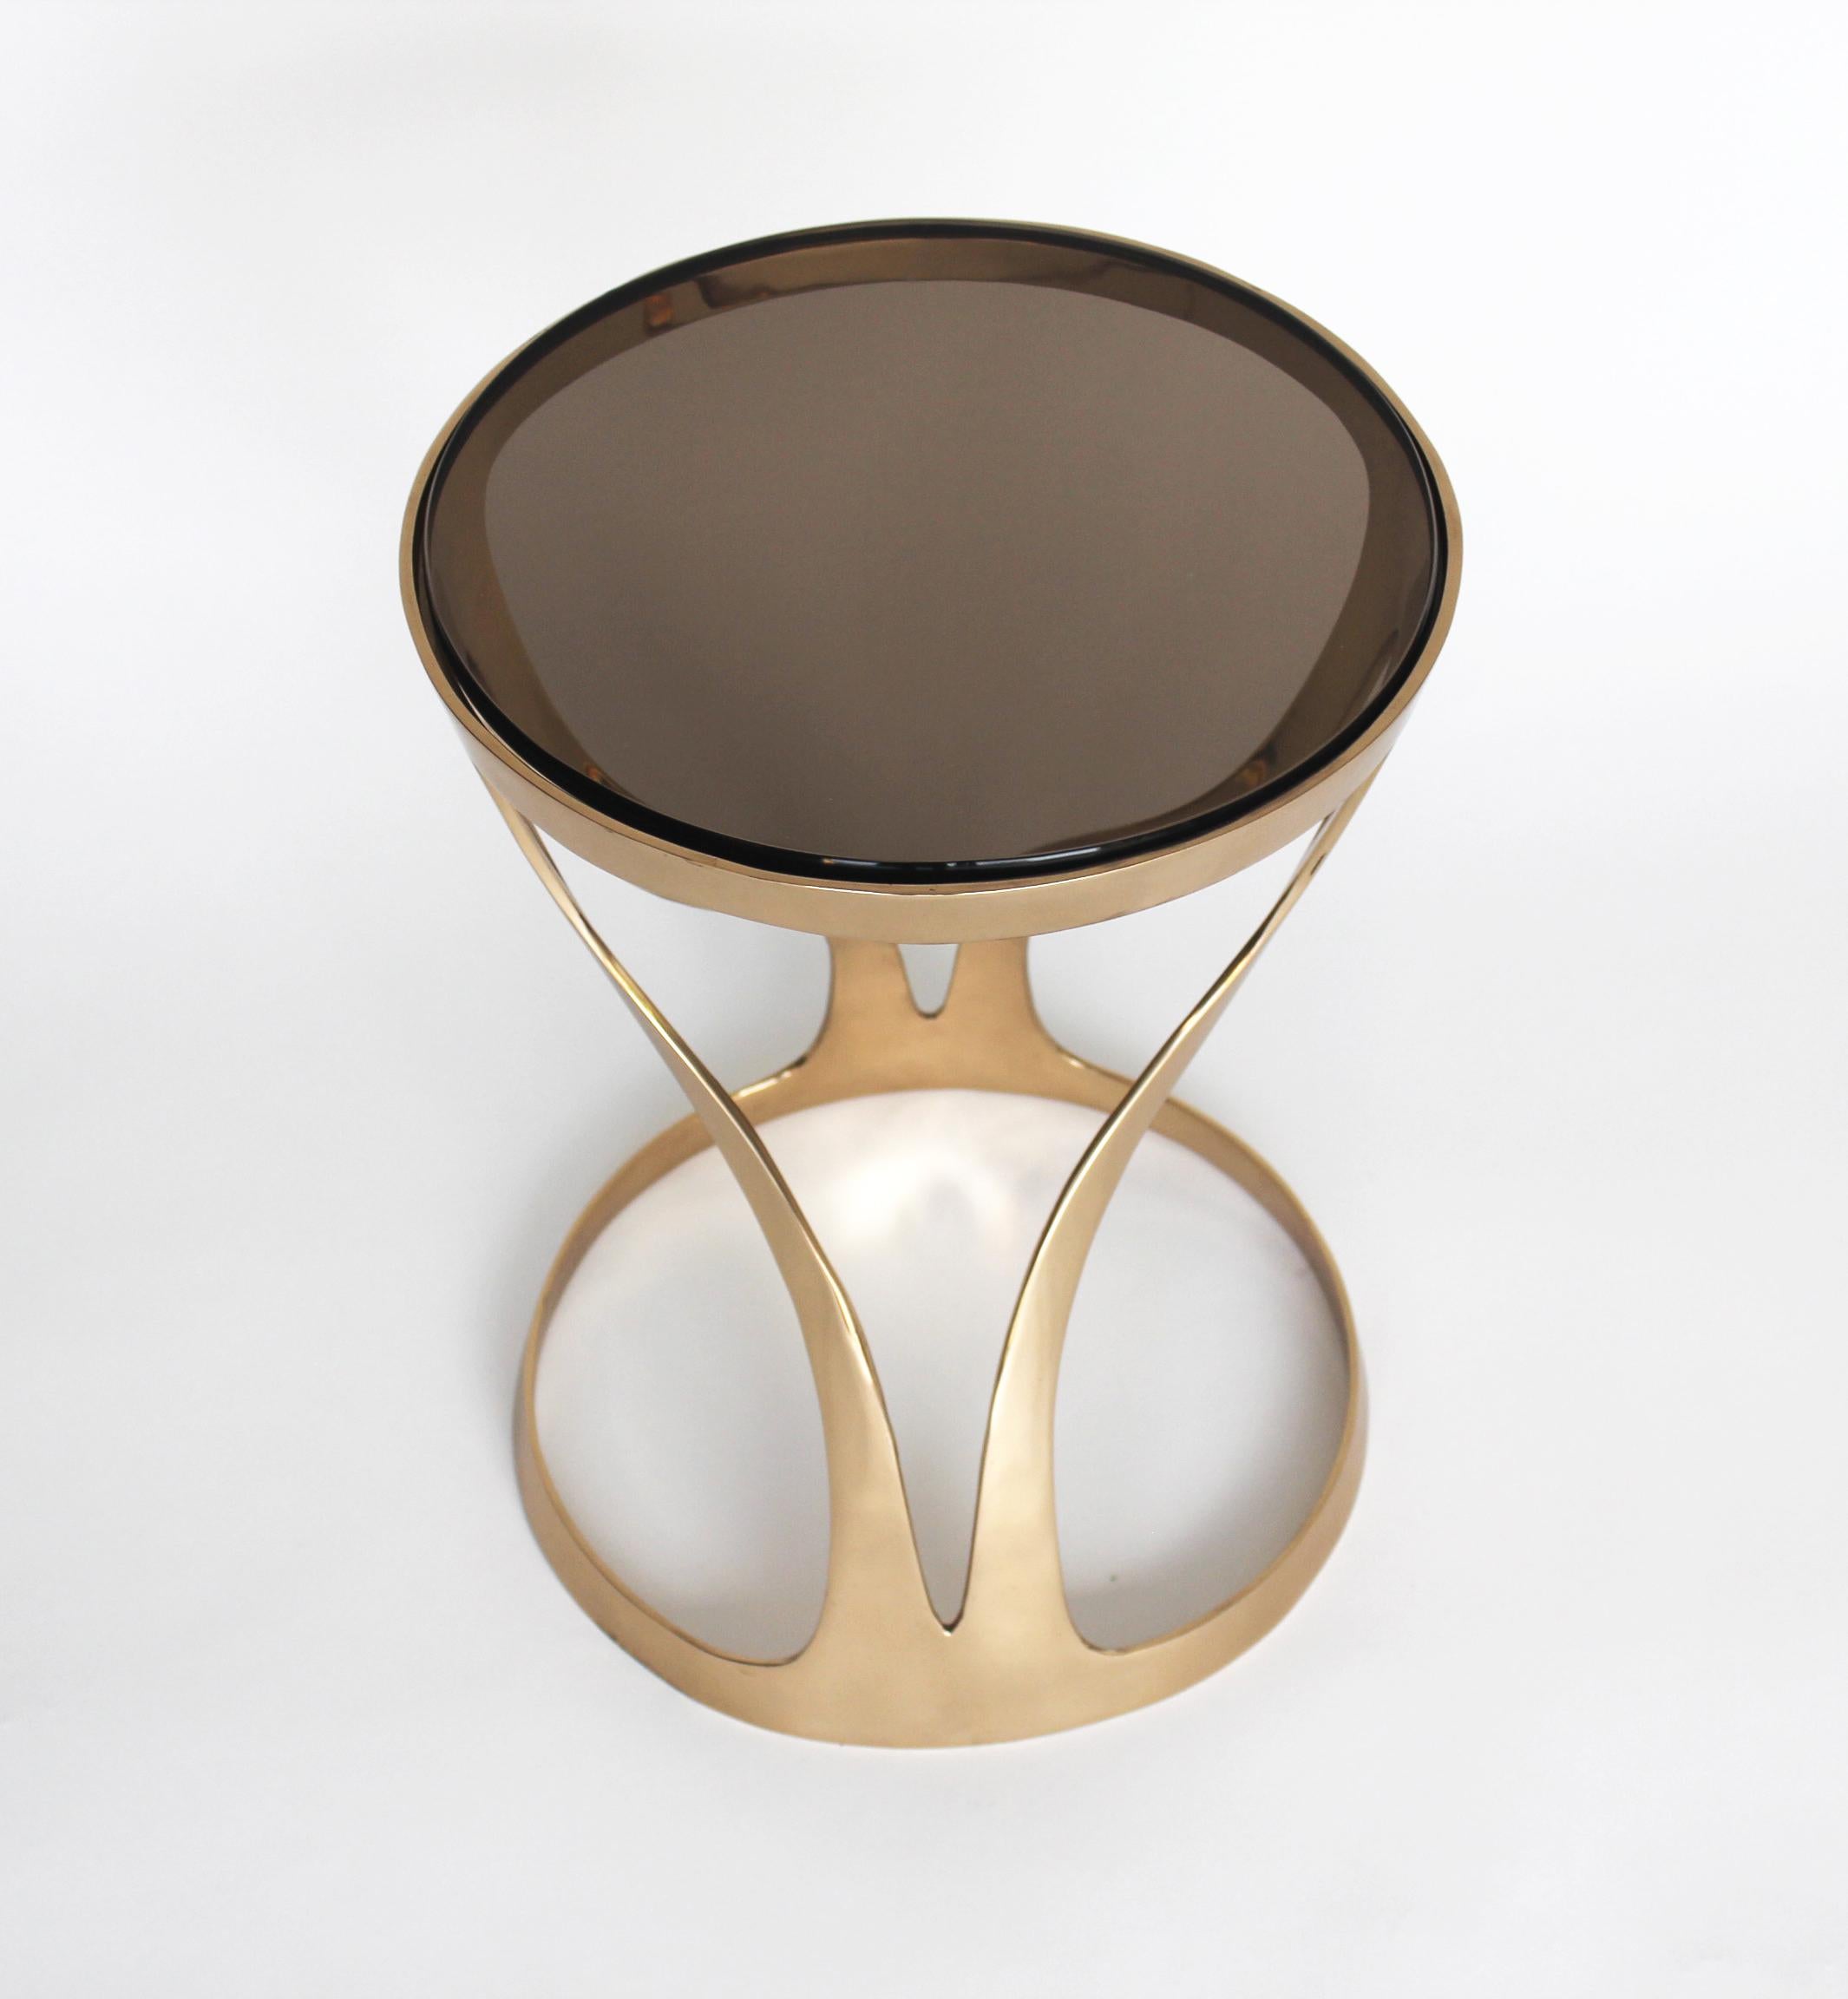 American Lyra Table - Polished Bronze & Smoked Glass - Design by Michael Sean Stolworthy For Sale